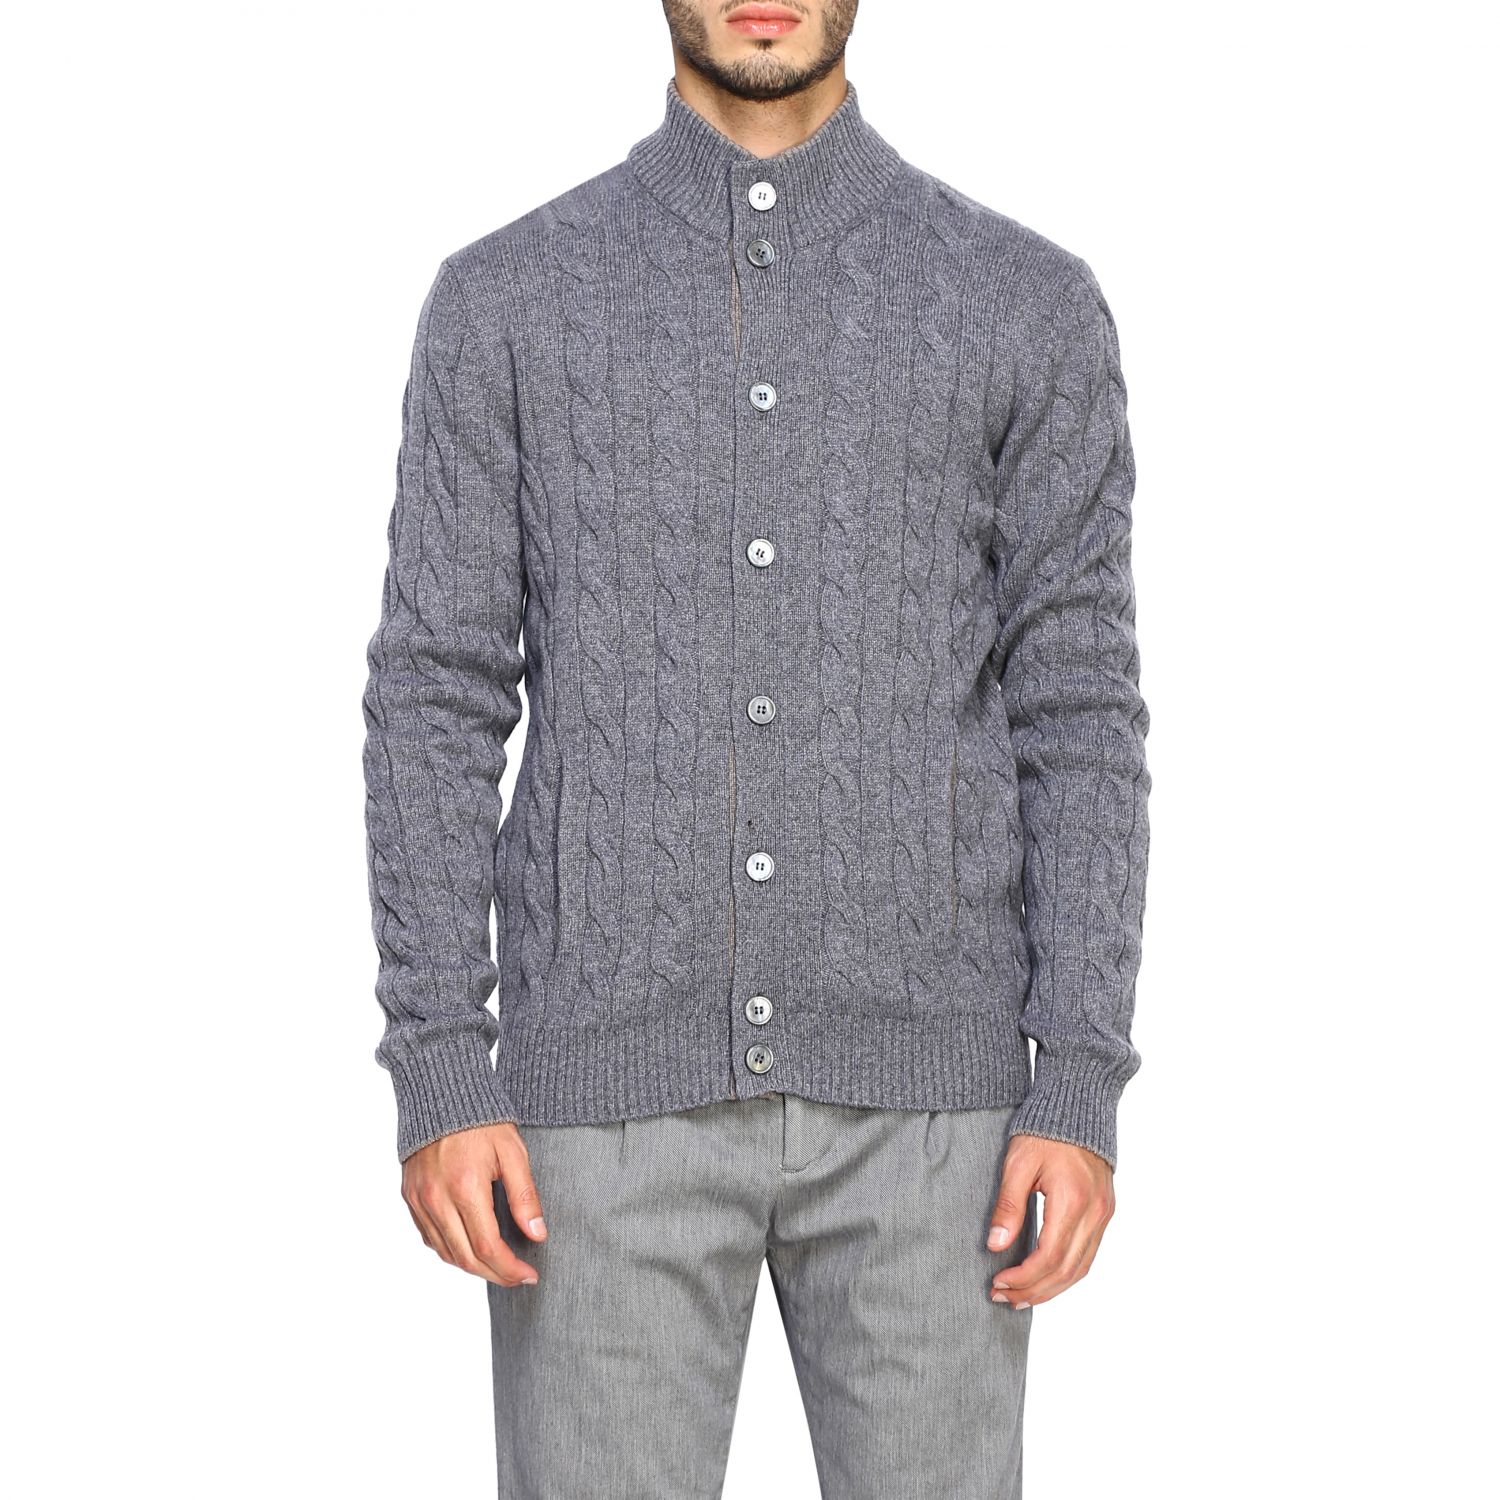 Gran Sasso Outlet: sweater for man - Grey | Gran Sasso sweater 23188 ...